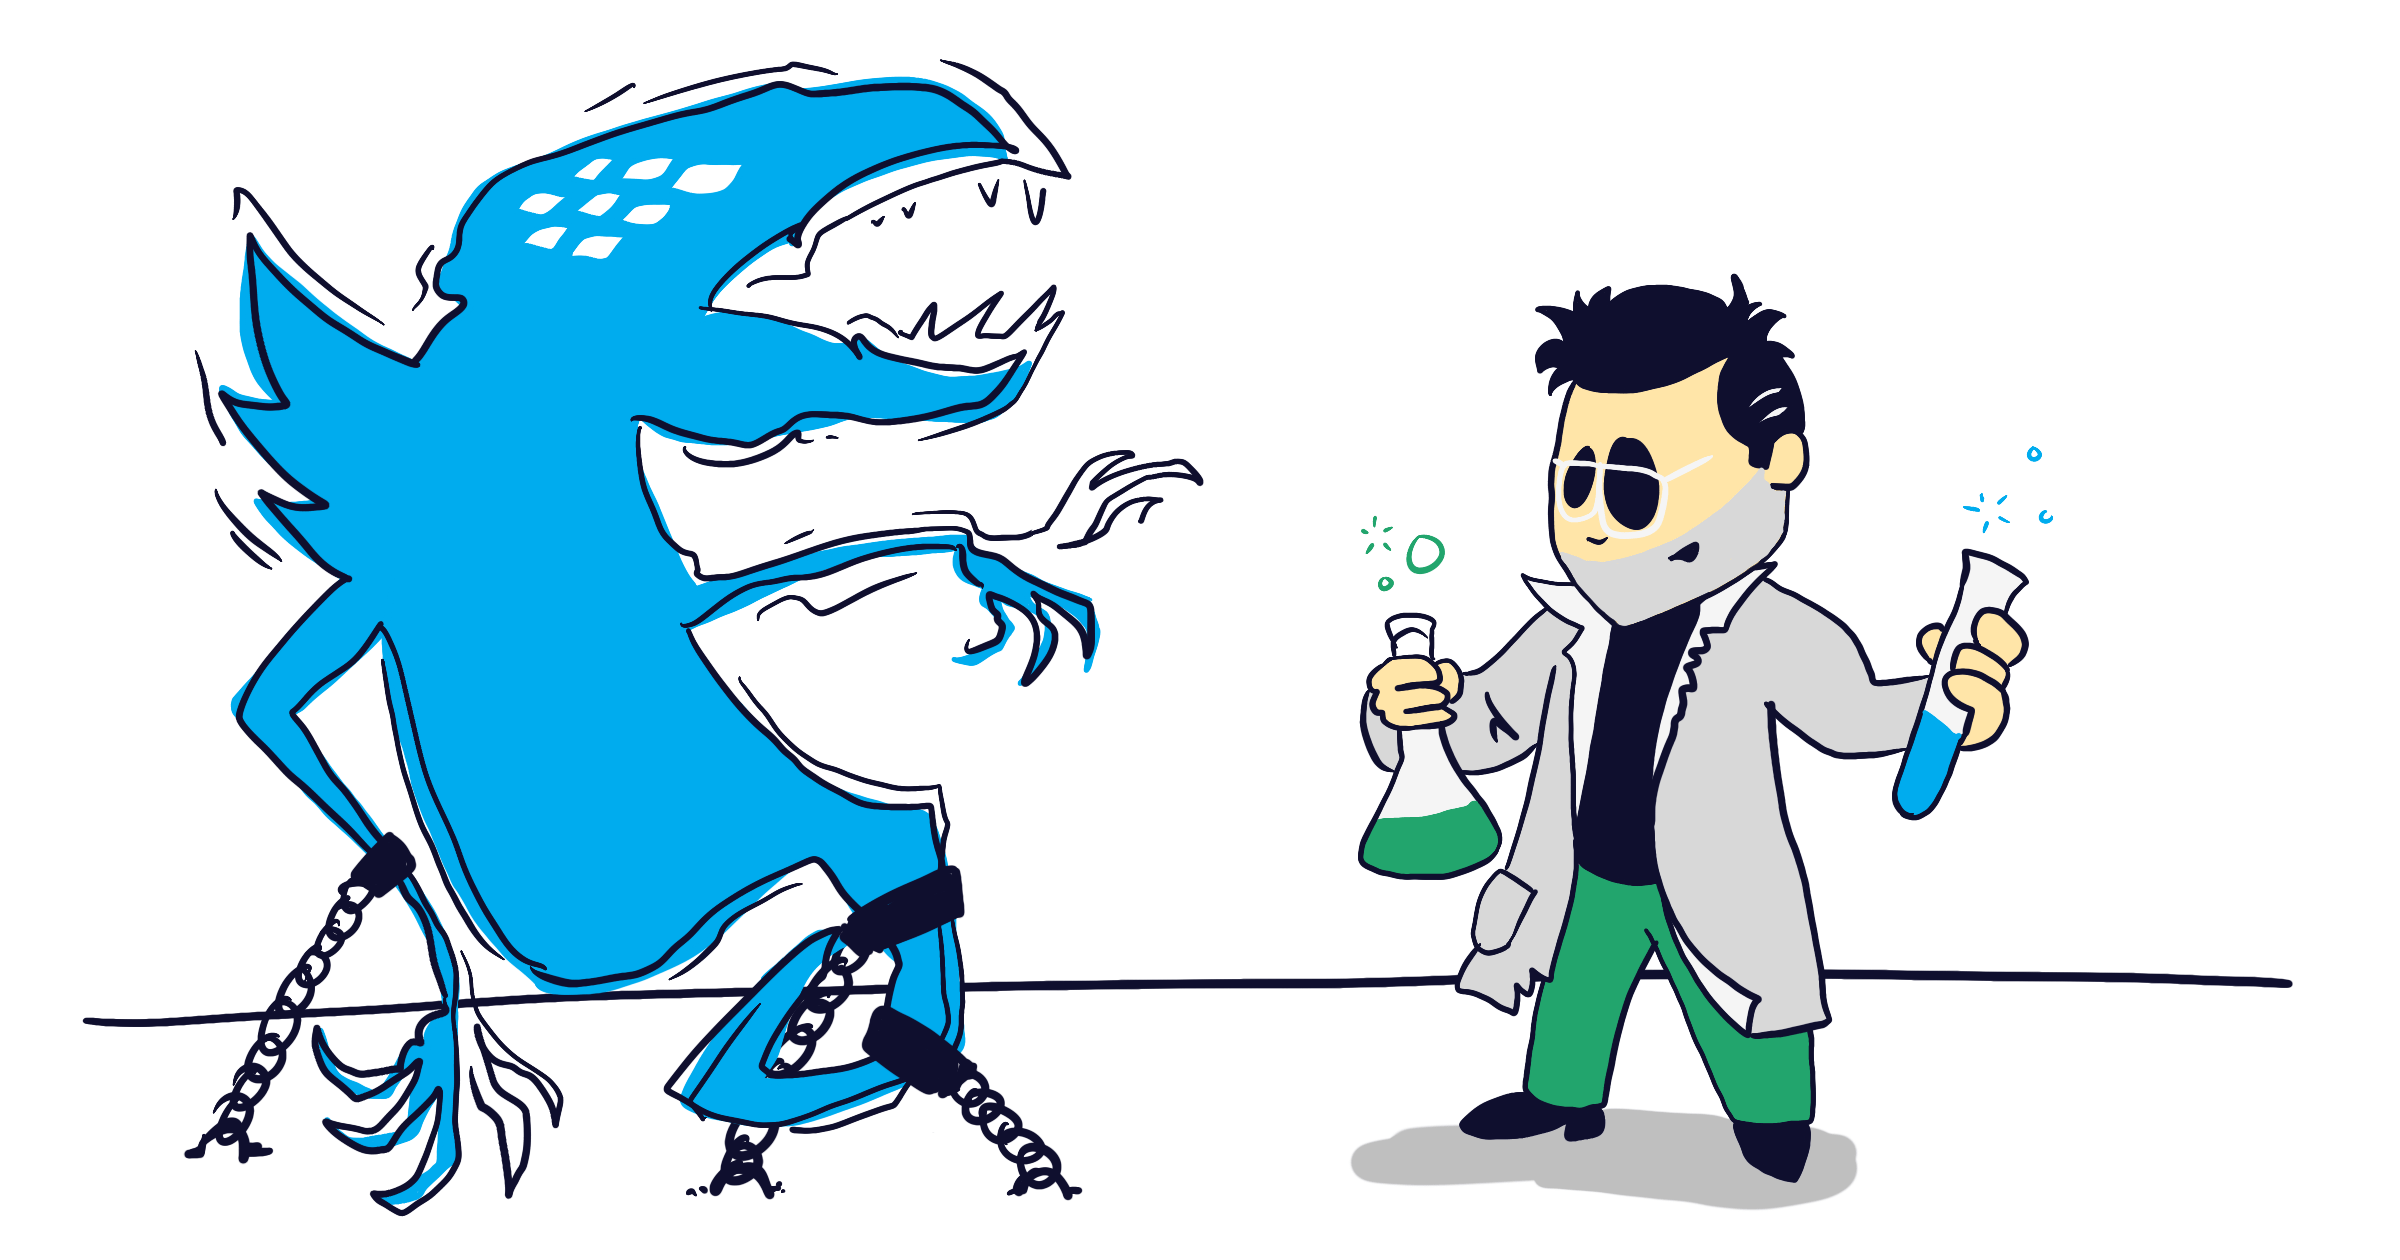 Cartoon-version of Carlos Eriksson dressed as a scientist, experimenting with a giant floating blue bird-monster.